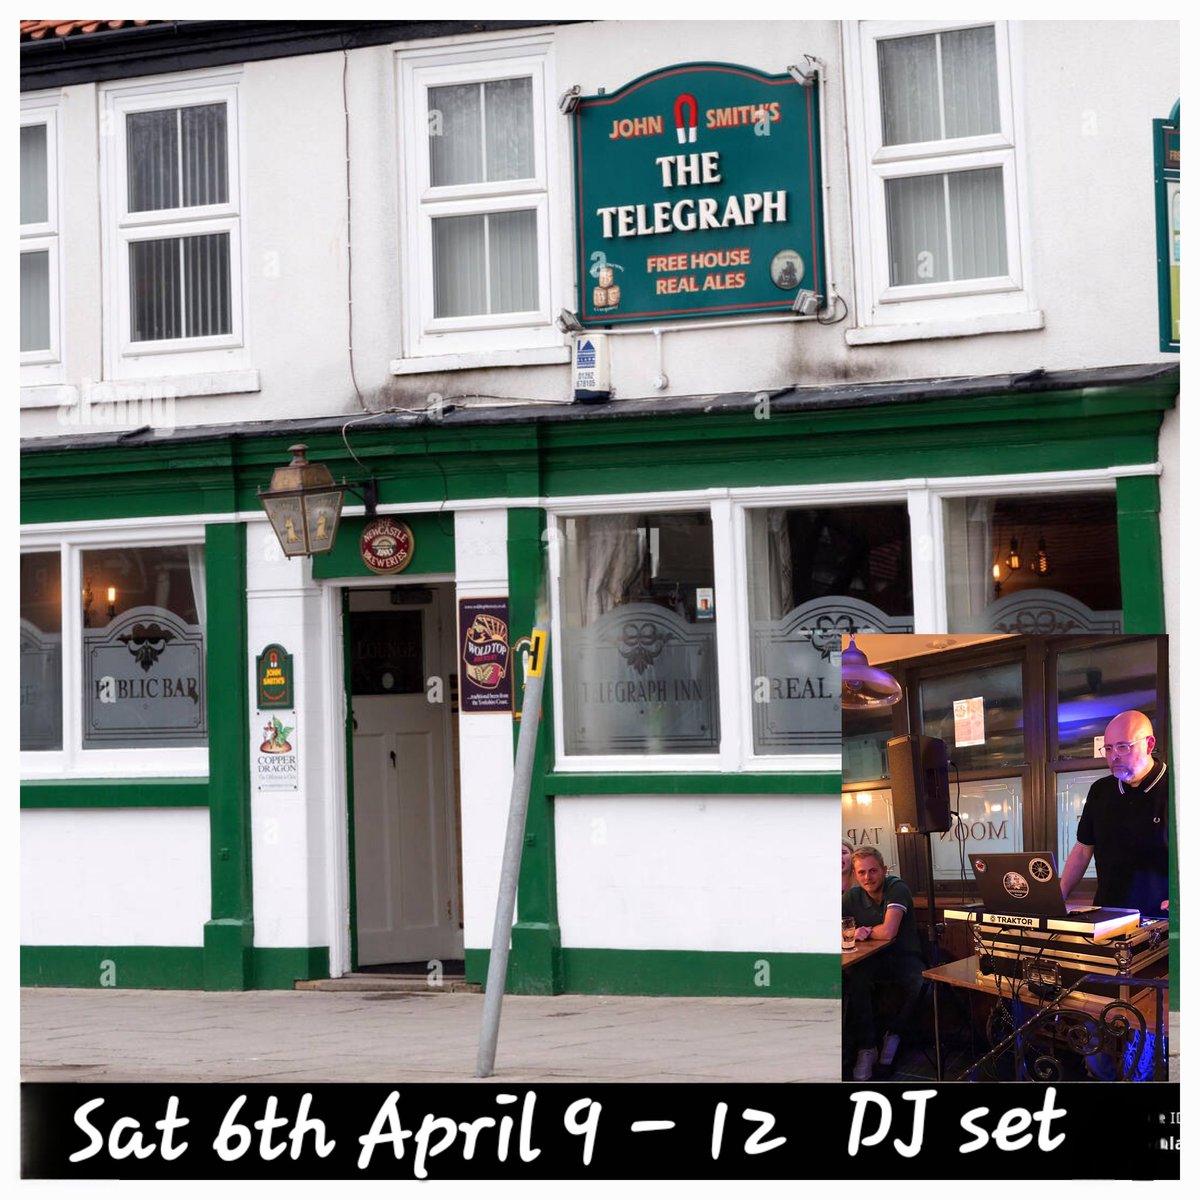 *This Saturday* DJ set at the Telegraph Inn Bridlington 9 - Midnight Tunes from 60's, 70's, 80's, 90's & 2000's. Including: @paulwellerHQ @stonefoundation @TeenageWaitress @theblowmonkeys @WhiteHague @drummerwhitey Spread the word brothers and sisters 🎧🎚🎛🎚🔊🔊🎶🎵